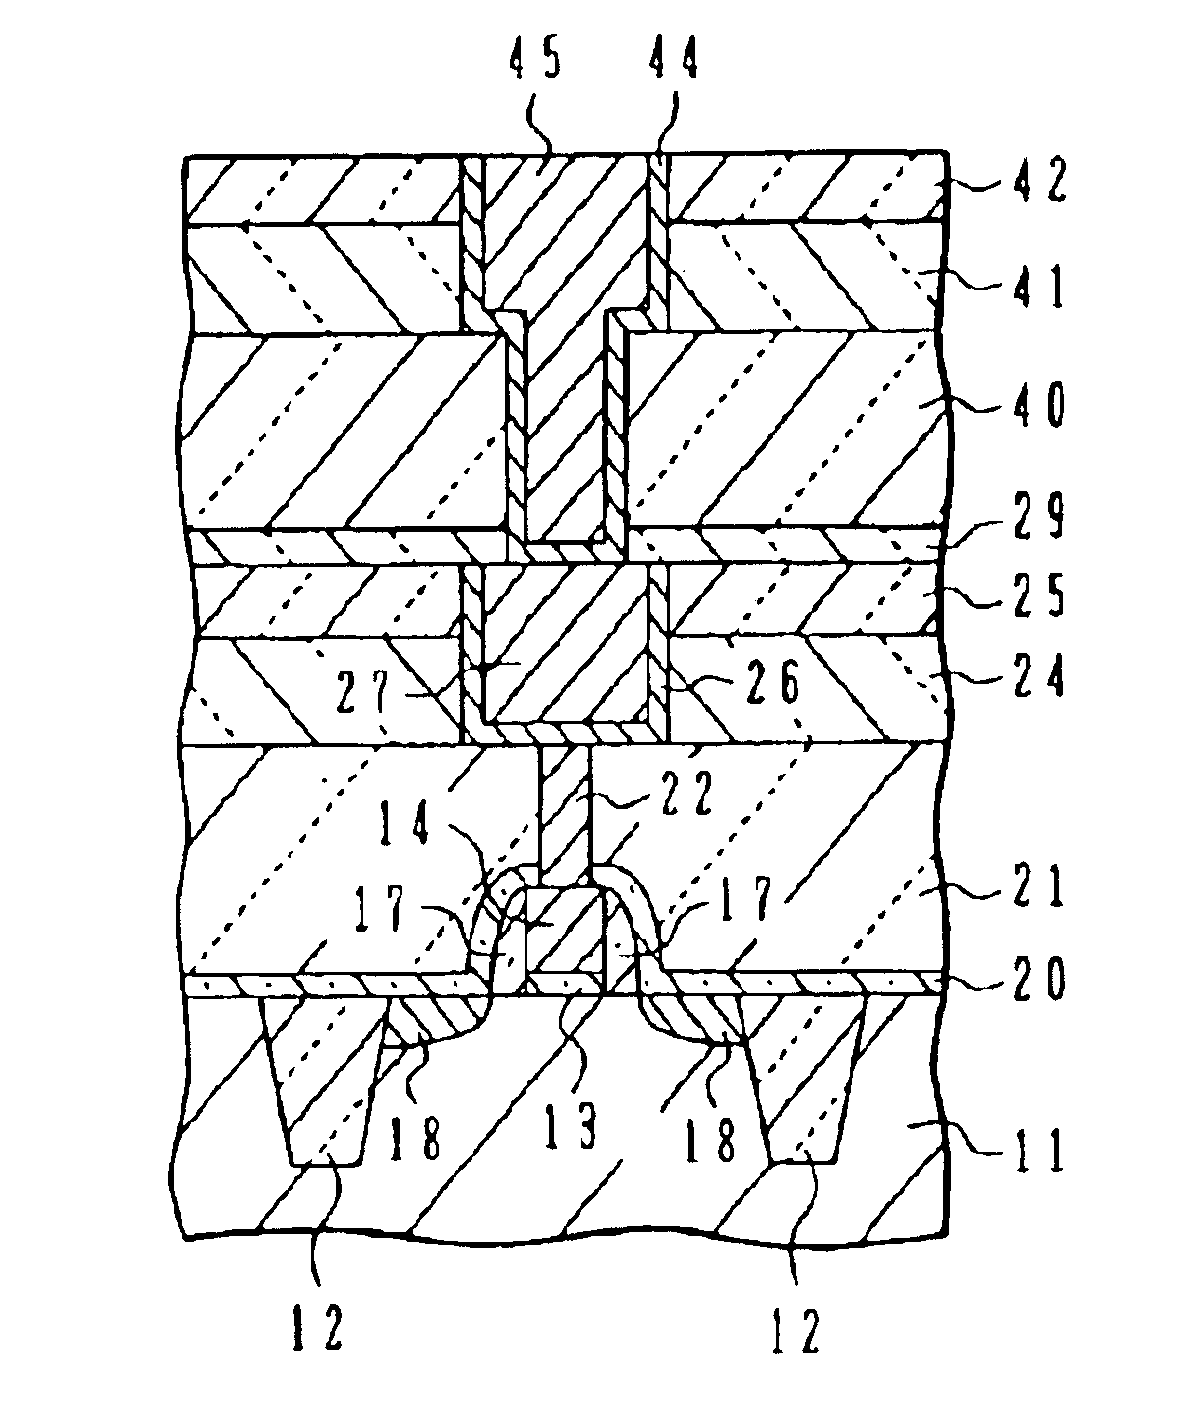 Semiconductor device with copper wirings